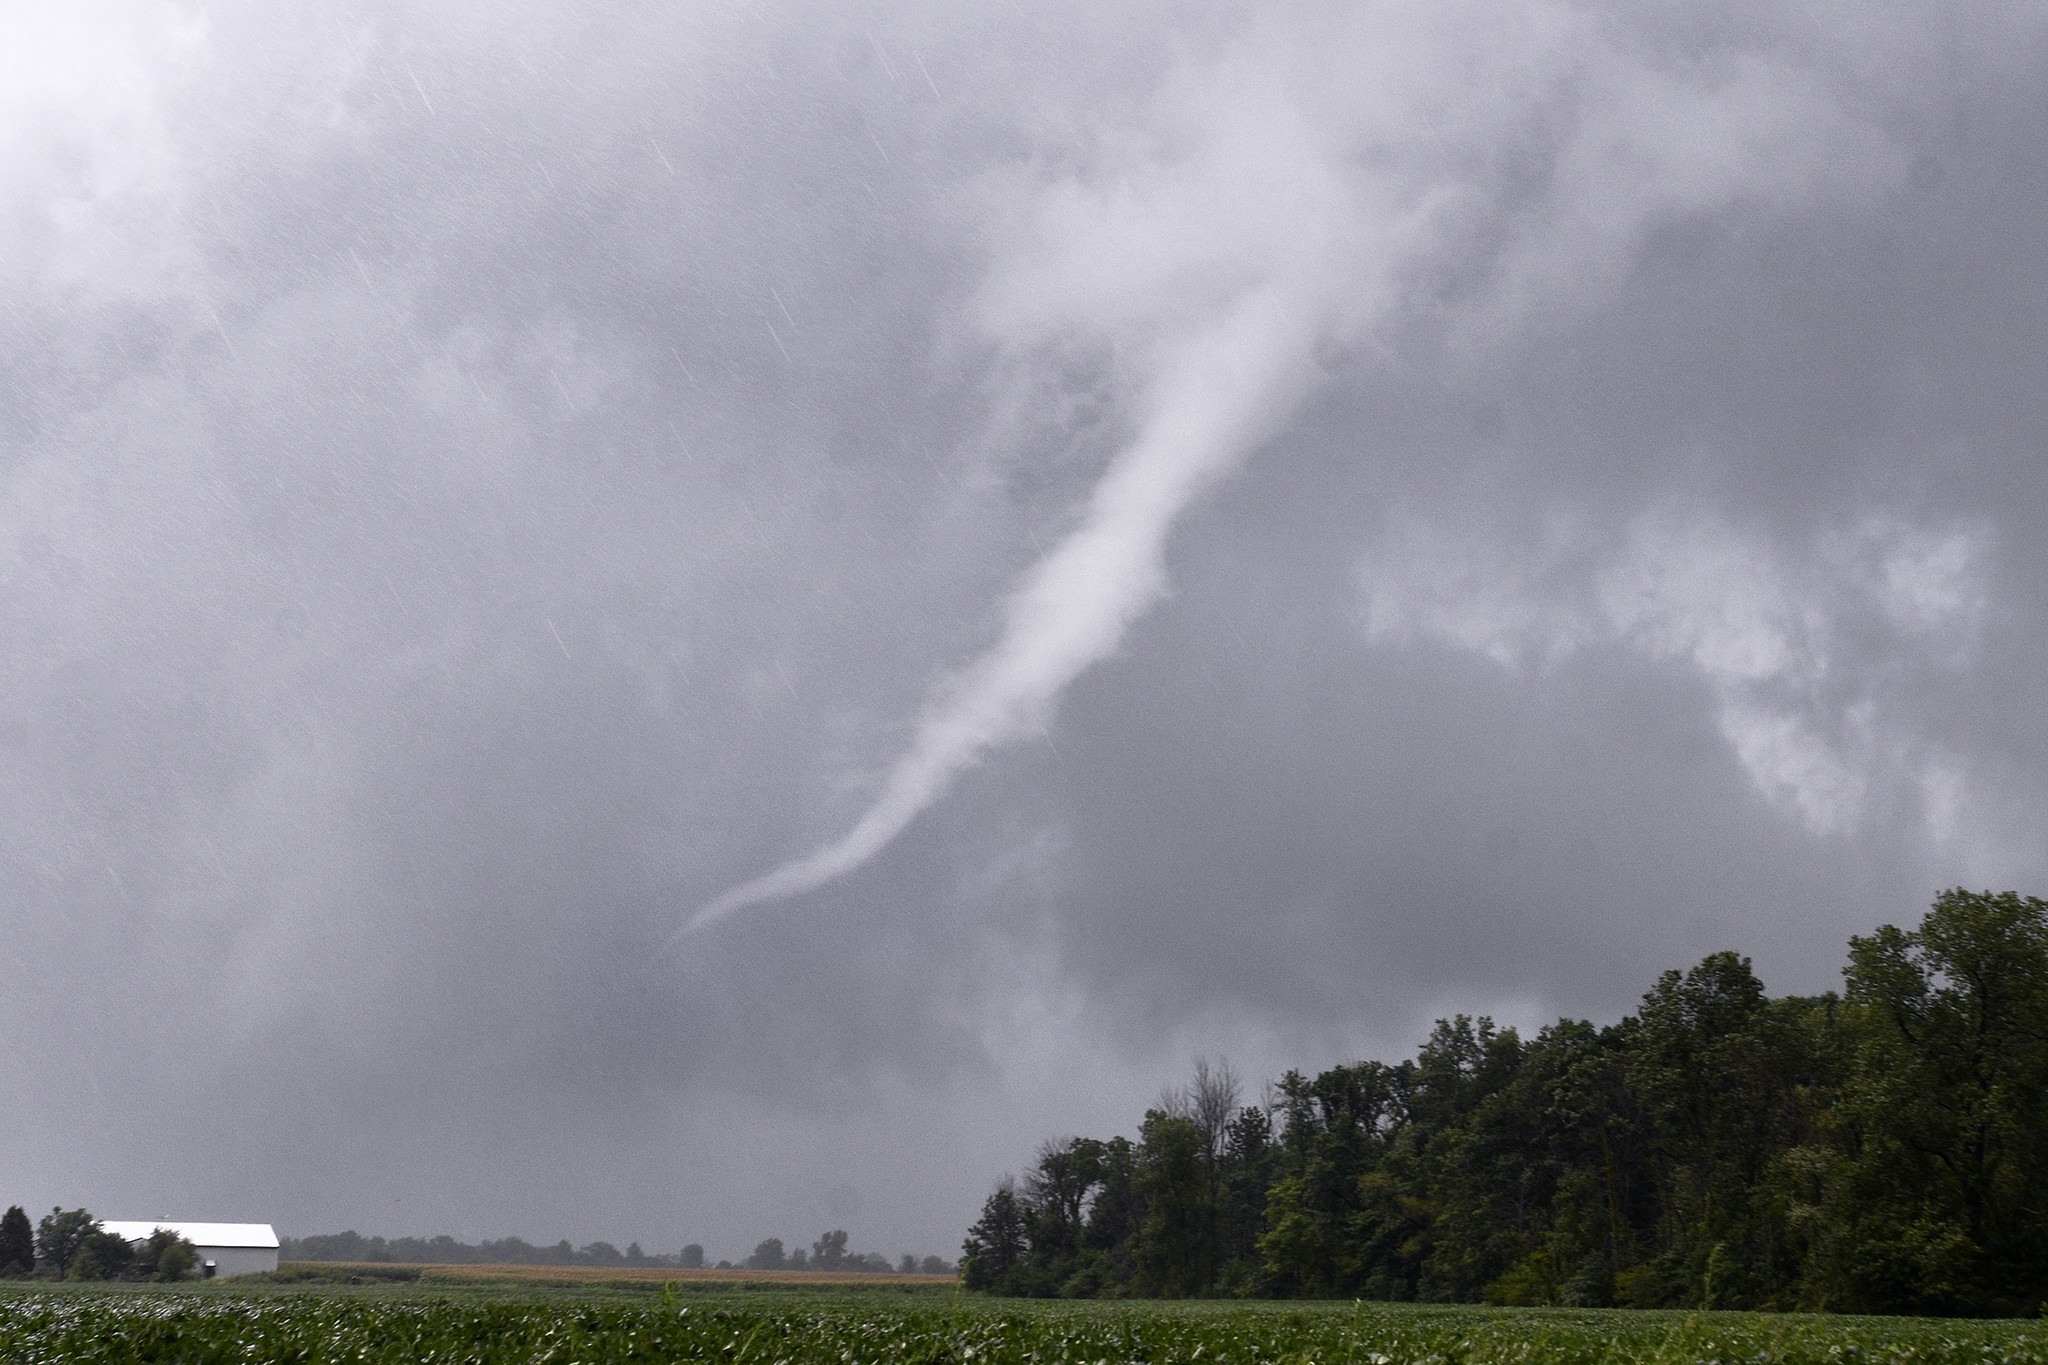 State police: No serious injuries after multiple tornadoes hit central